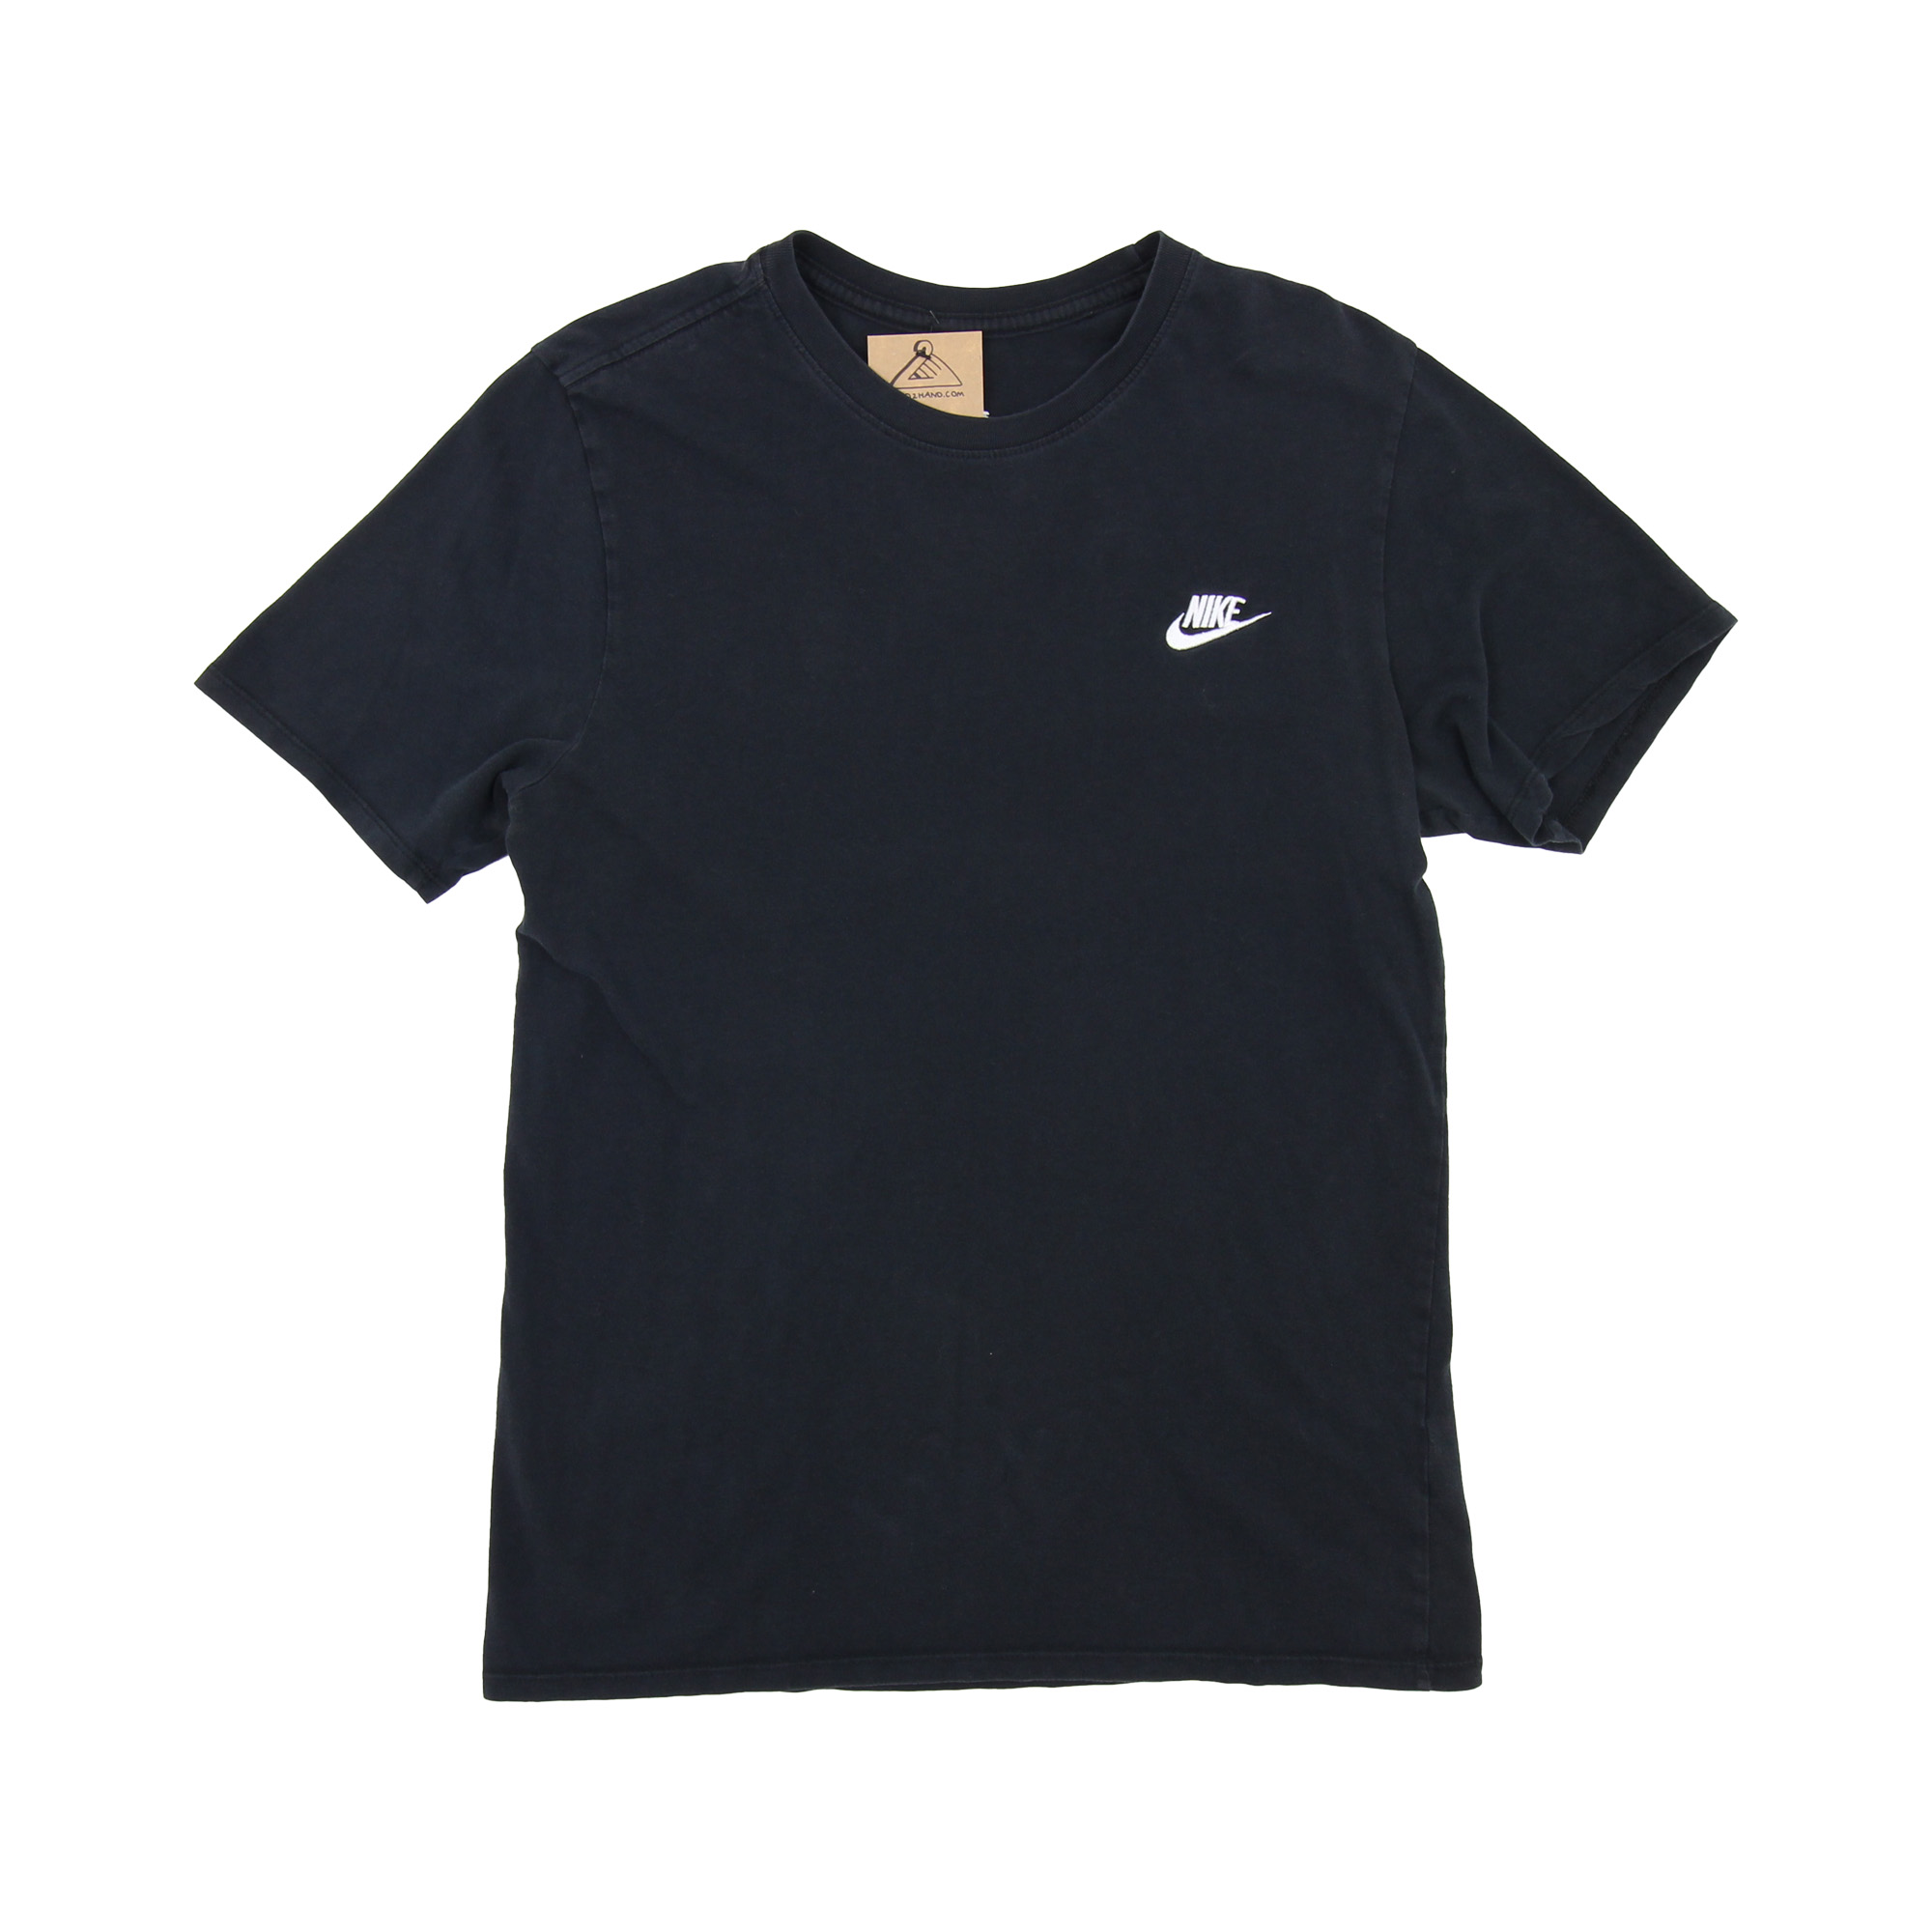 Nike Embroidered Logo T-Shirt -  S/M